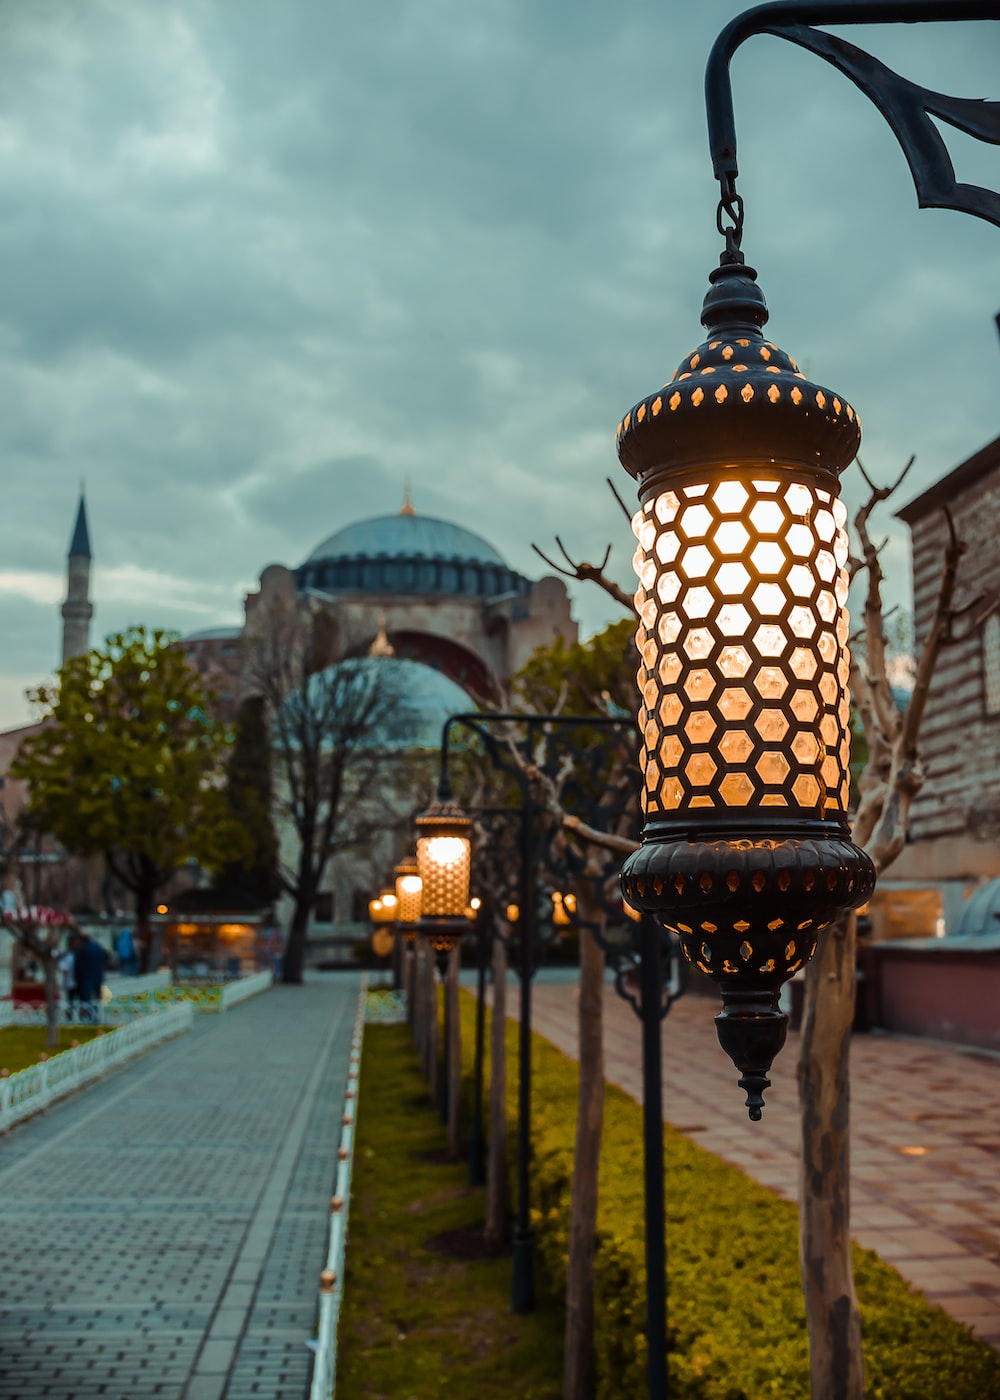 The Hagia Sophia Mosque, Istanbul, Turkey Picture. Download Free Image